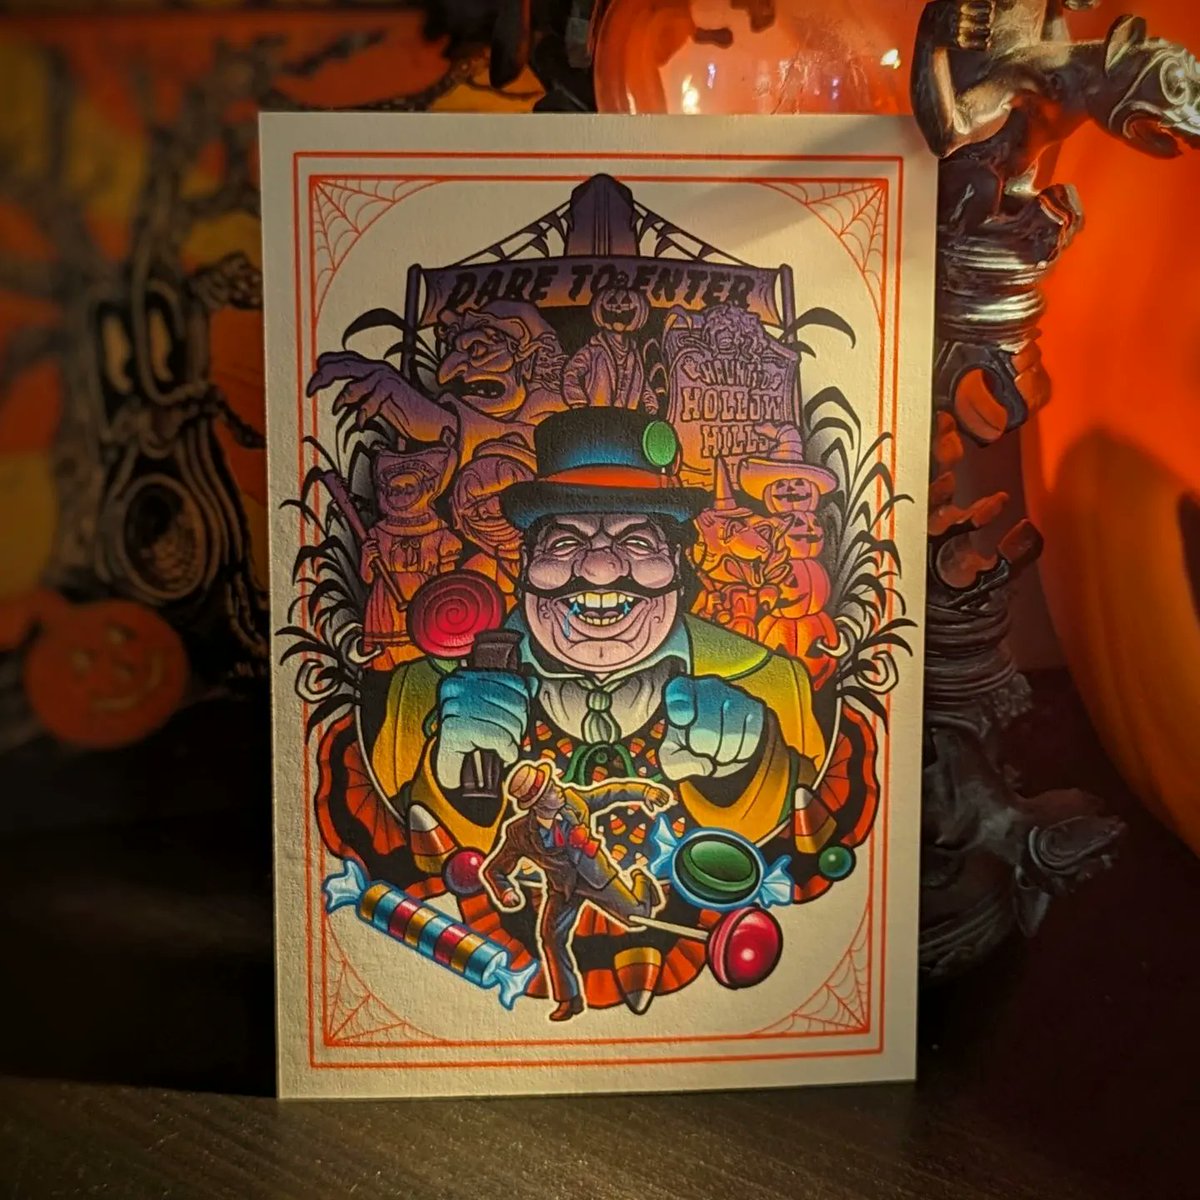 With the #hhn33 rumors suggesting we might be getting a Sweet Revenge house this year I figured it would be a good time to make a mini 4'x6' version of my Major Sweets poster print.

Available on candycorncrypt.com